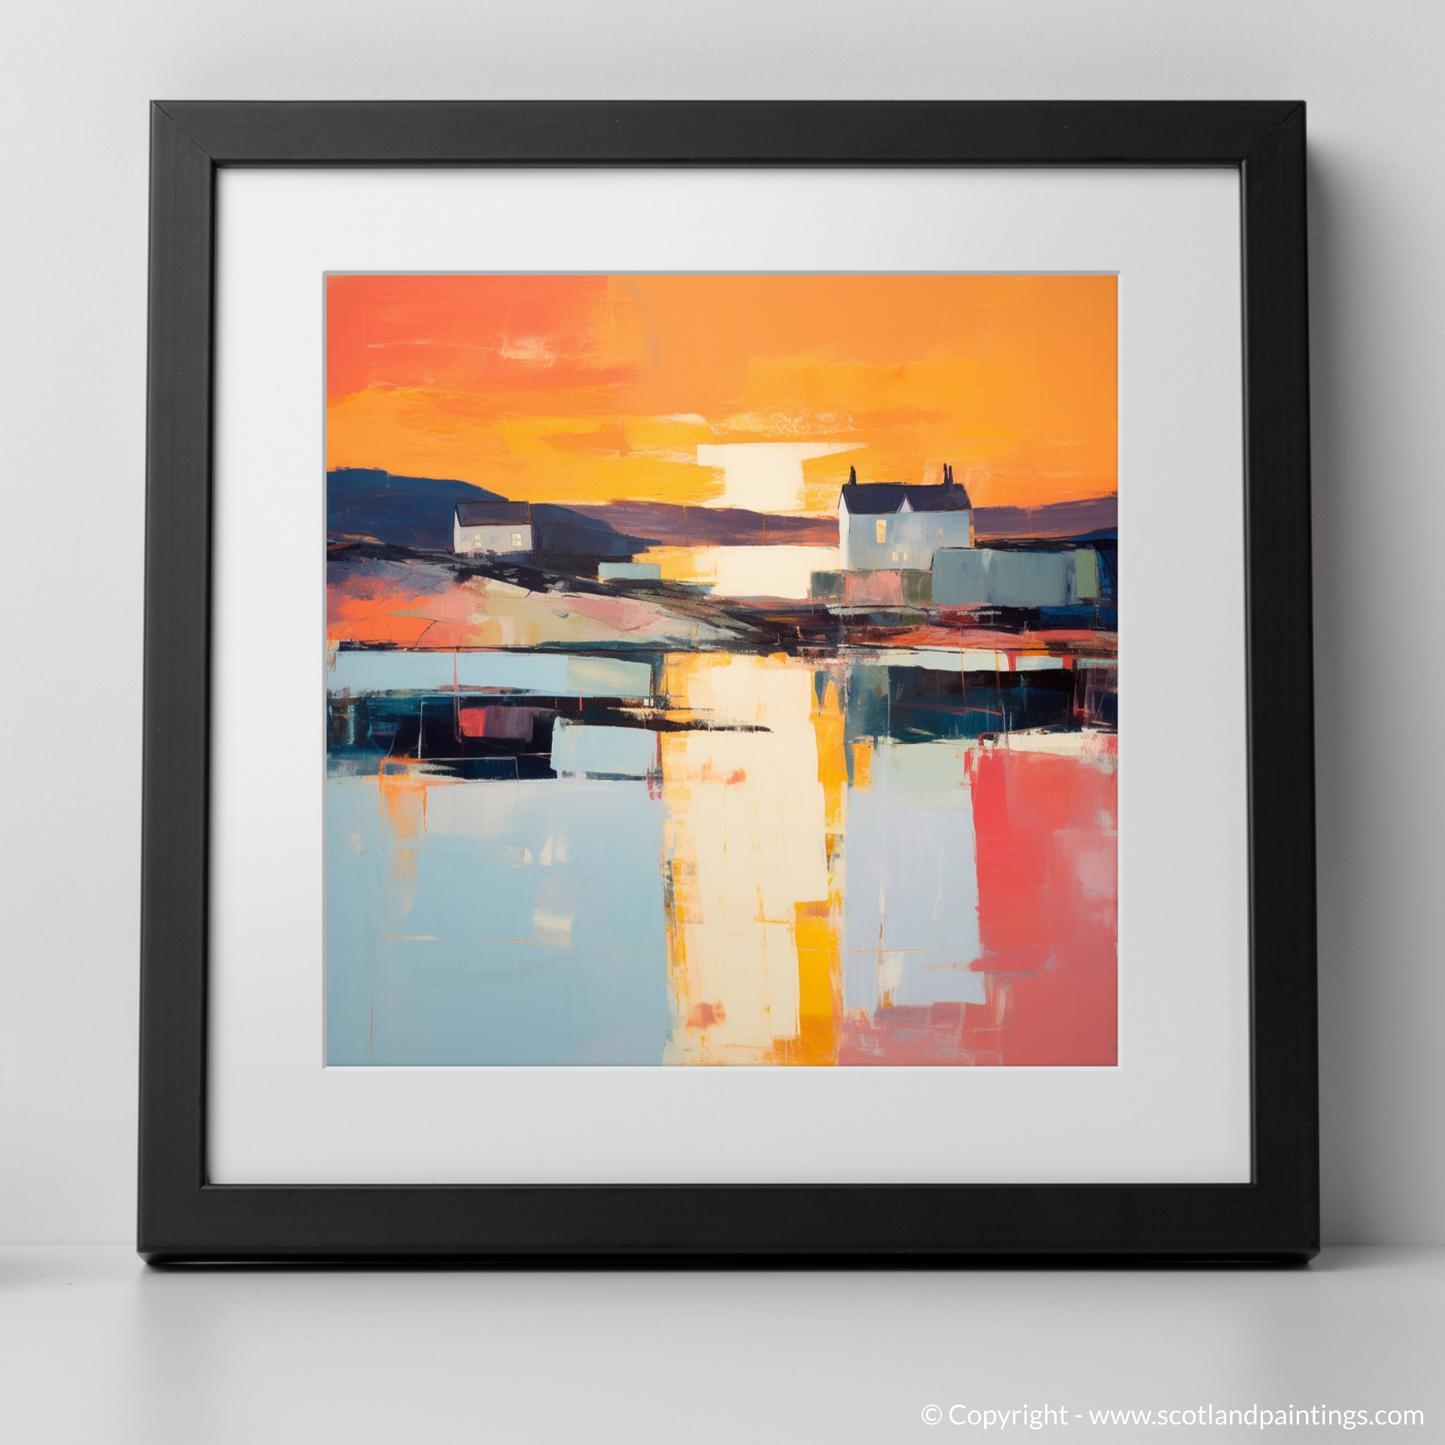 Craobh Haven Harbour at Twilight: A Colour Field Ode to Scottish Shores